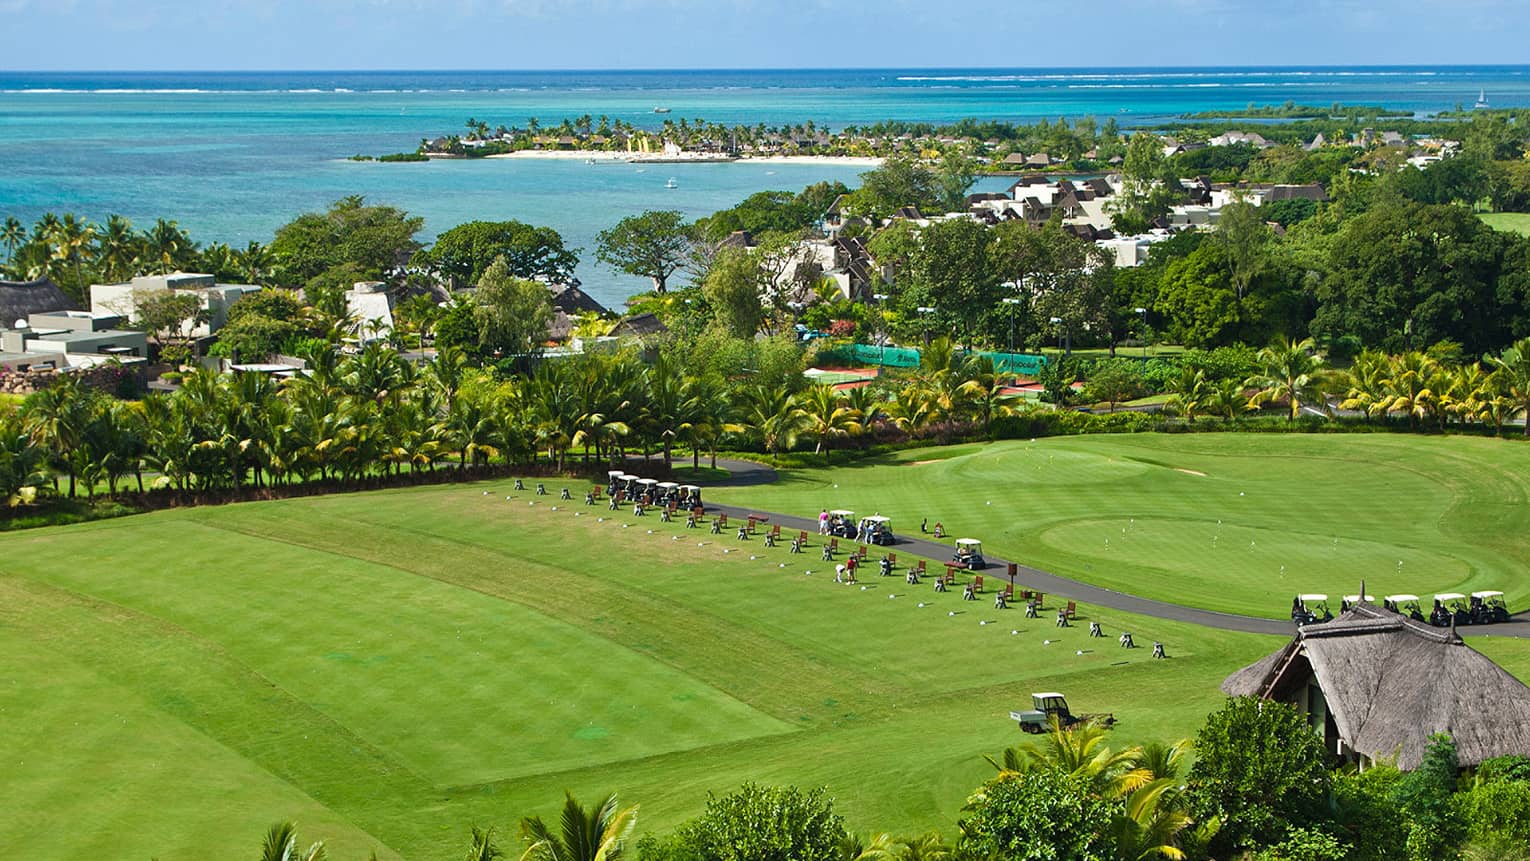 Looking down over large green lawn with rows of golf carts, trees and ocean